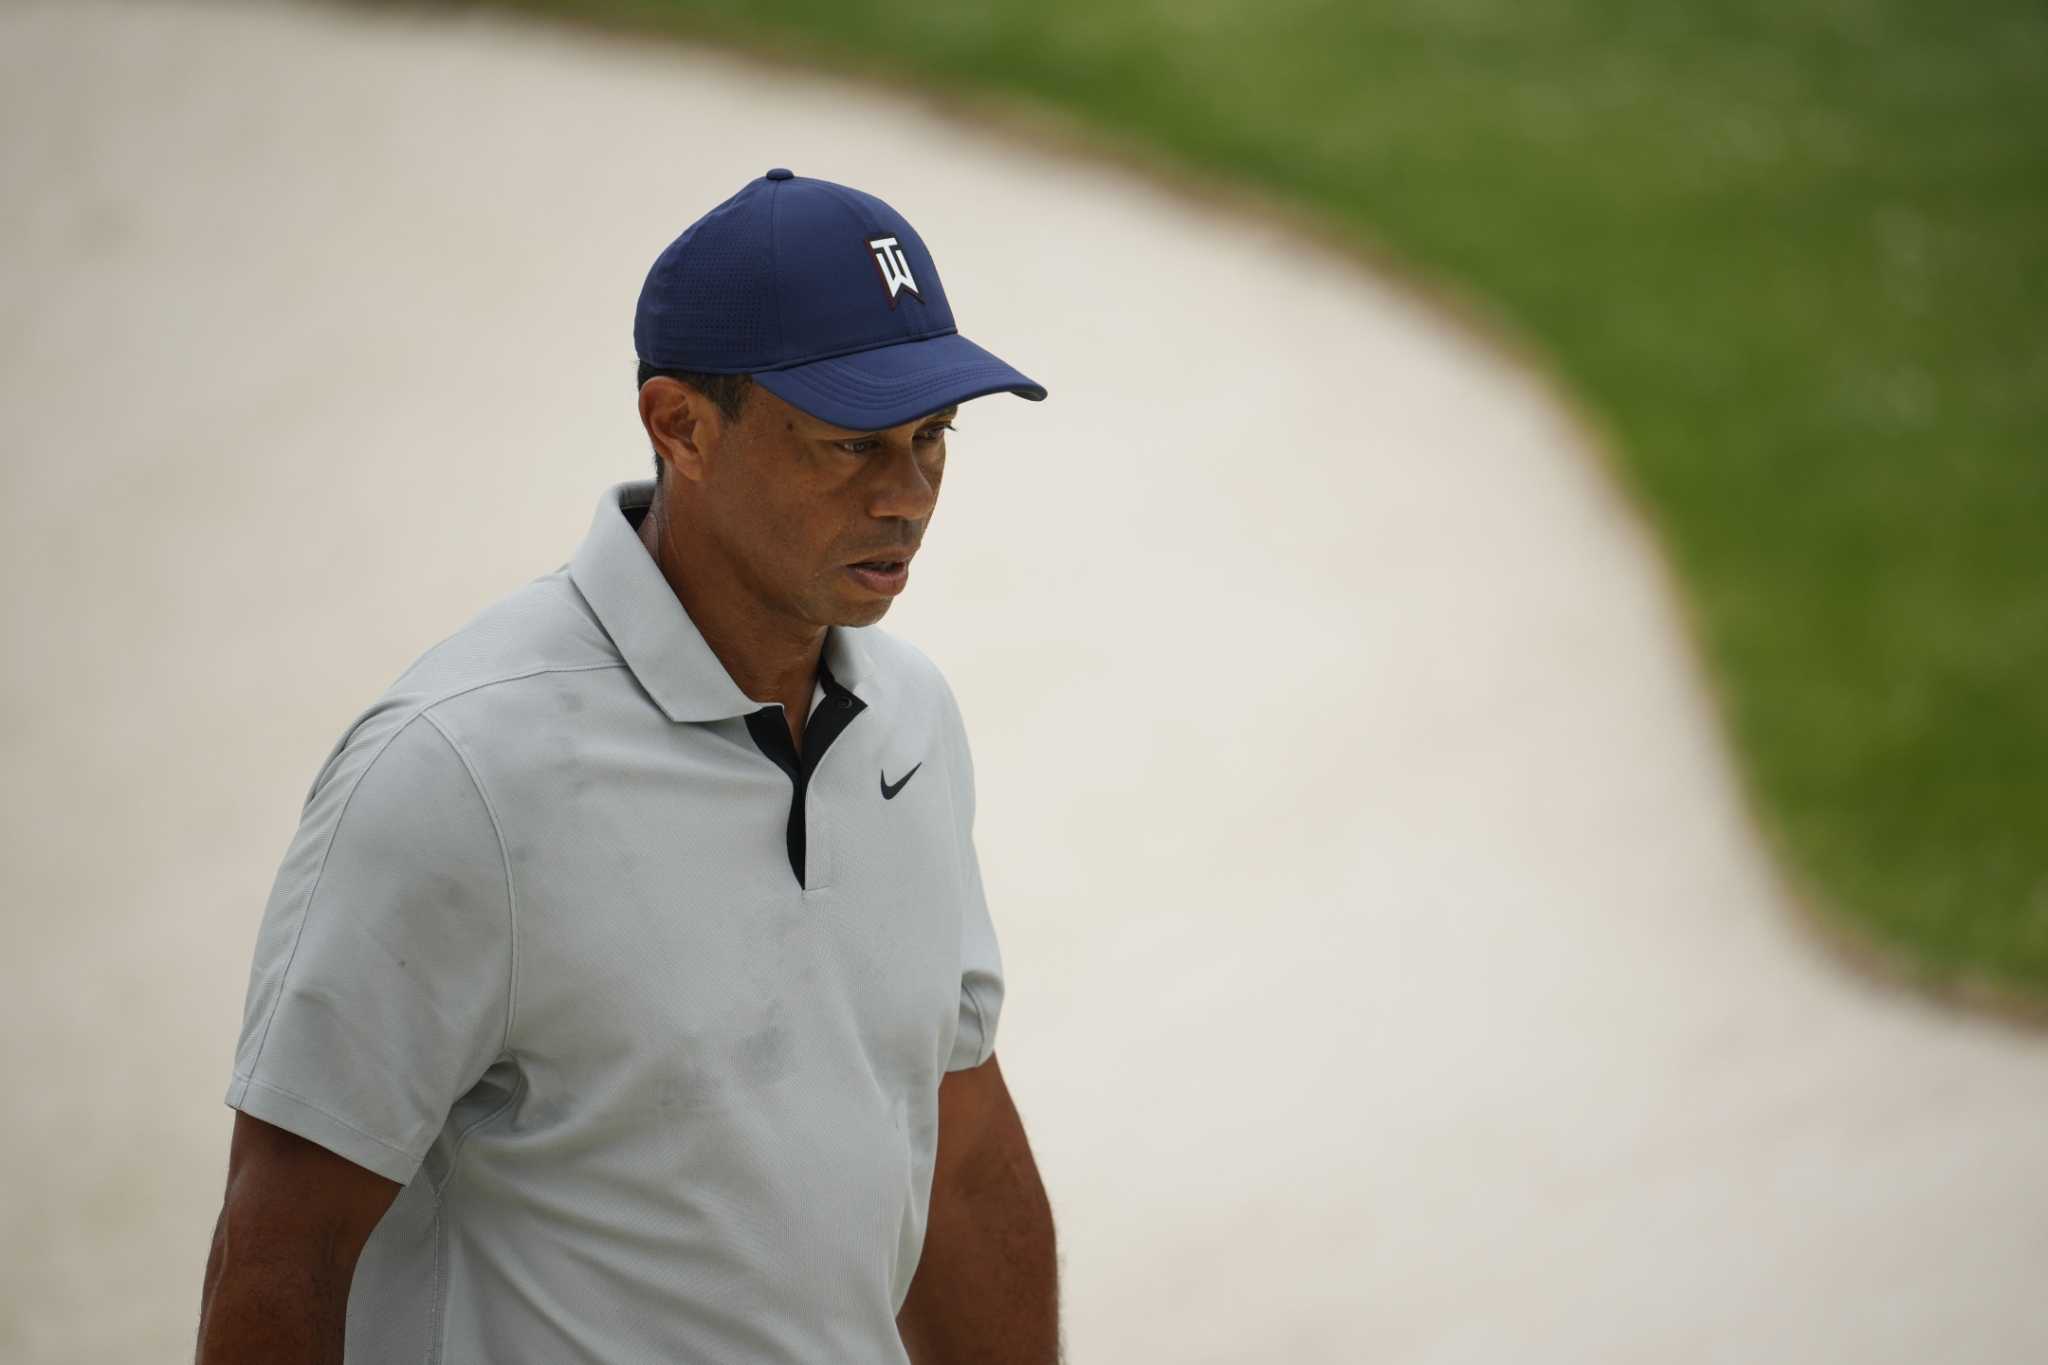 Tiger Woods at the Masters is a reminder golf needs to move on